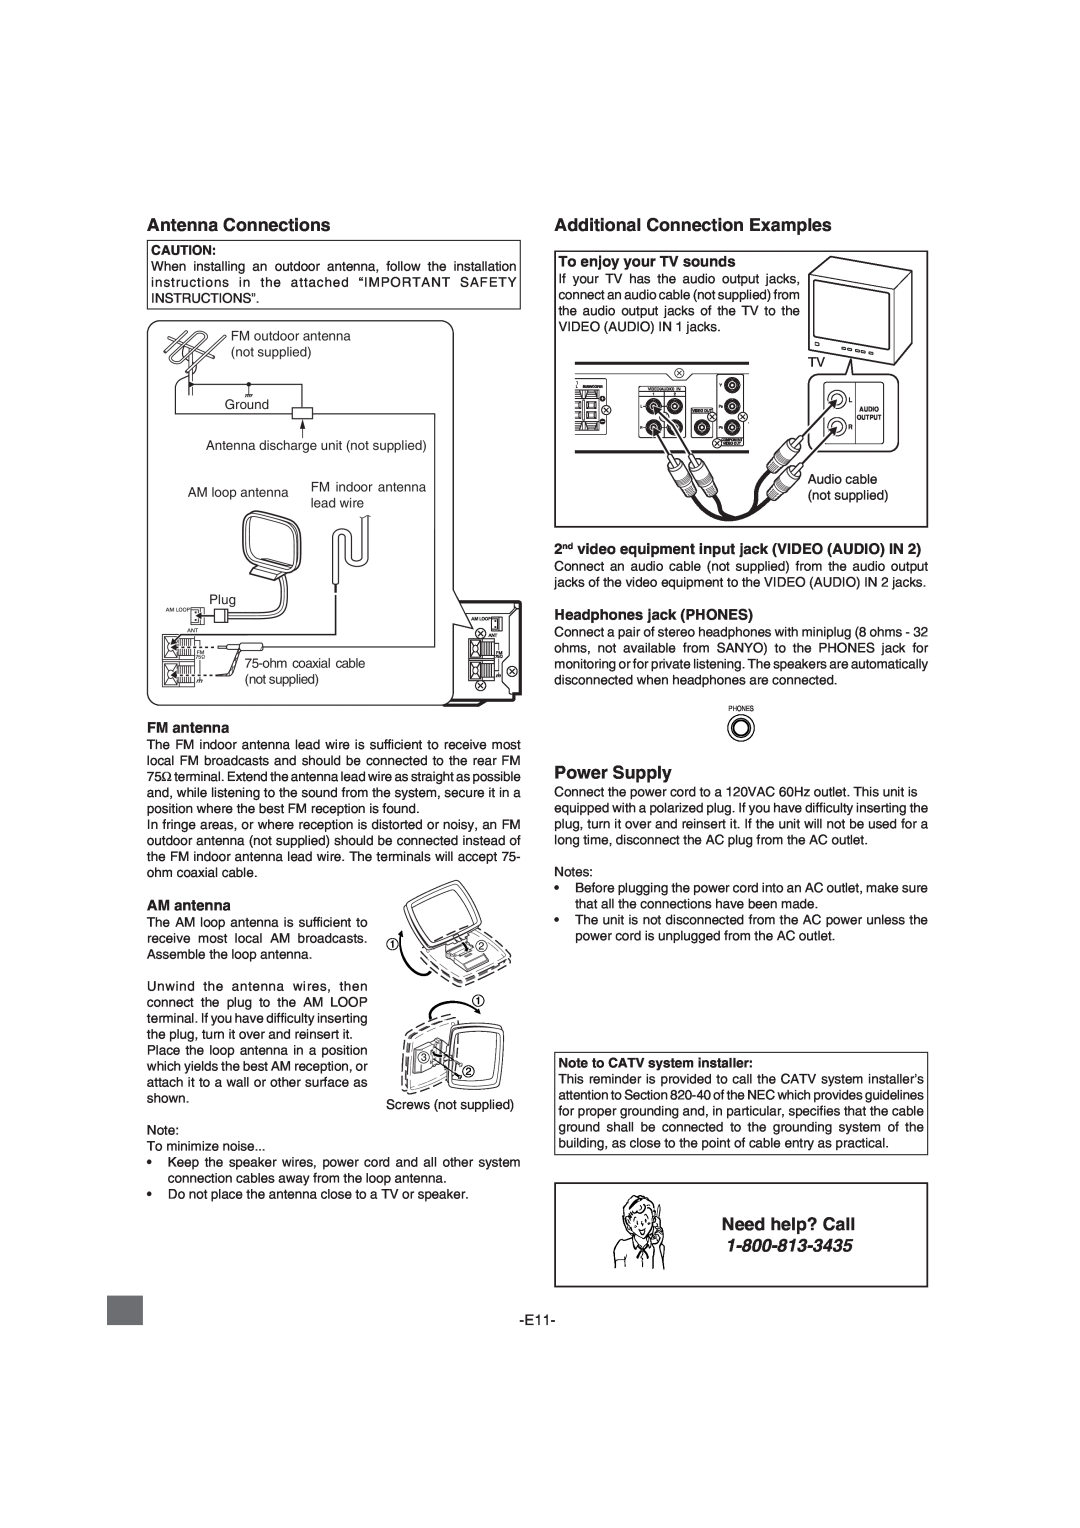 Sanyo DWM-2600 instruction manual Antenna Connections, Additional Connection Examples, Power Supply, Need help? Call 